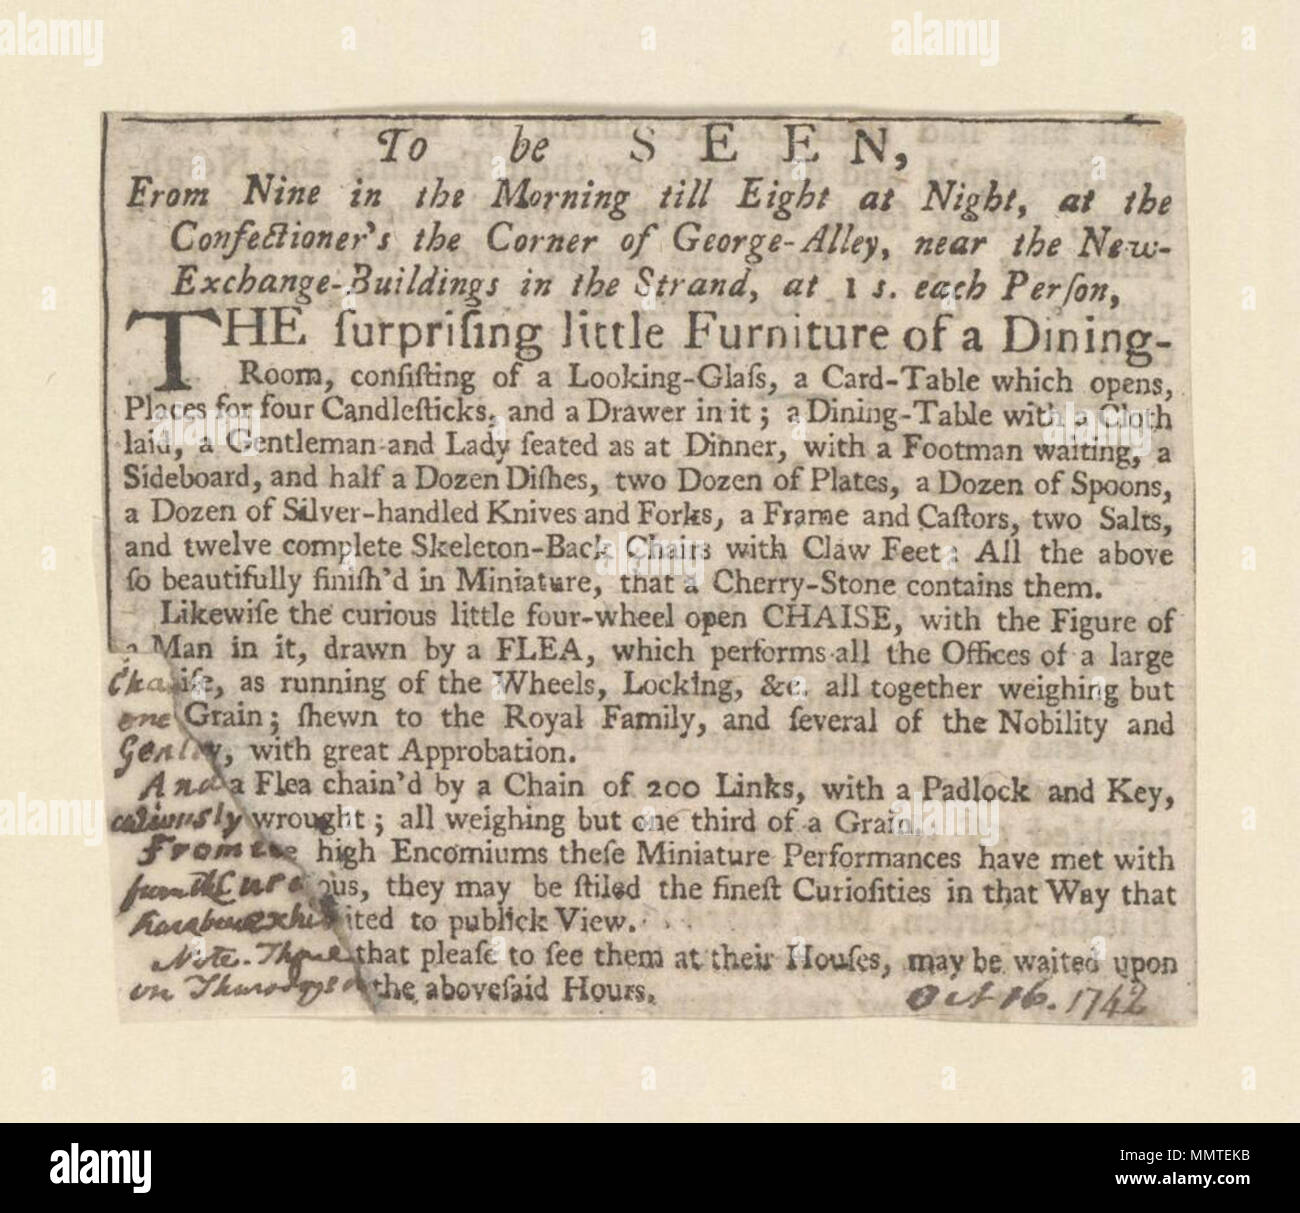 . Newscutting relating to an exhibition of miniature furniture and objects; Oct 16, 1742 (manuscript); Miniature furniture; Little four-wheel open chaise...drawn by a flea; To be seen, from nine in the morning till eight at night...  To be seen, from nine in the morning till eight at night.... 16 October 1789. The confectioner's ([London], England) [author] Bodleian Libraries, To be seen, from nine in the morning till eight at night... Stock Photo